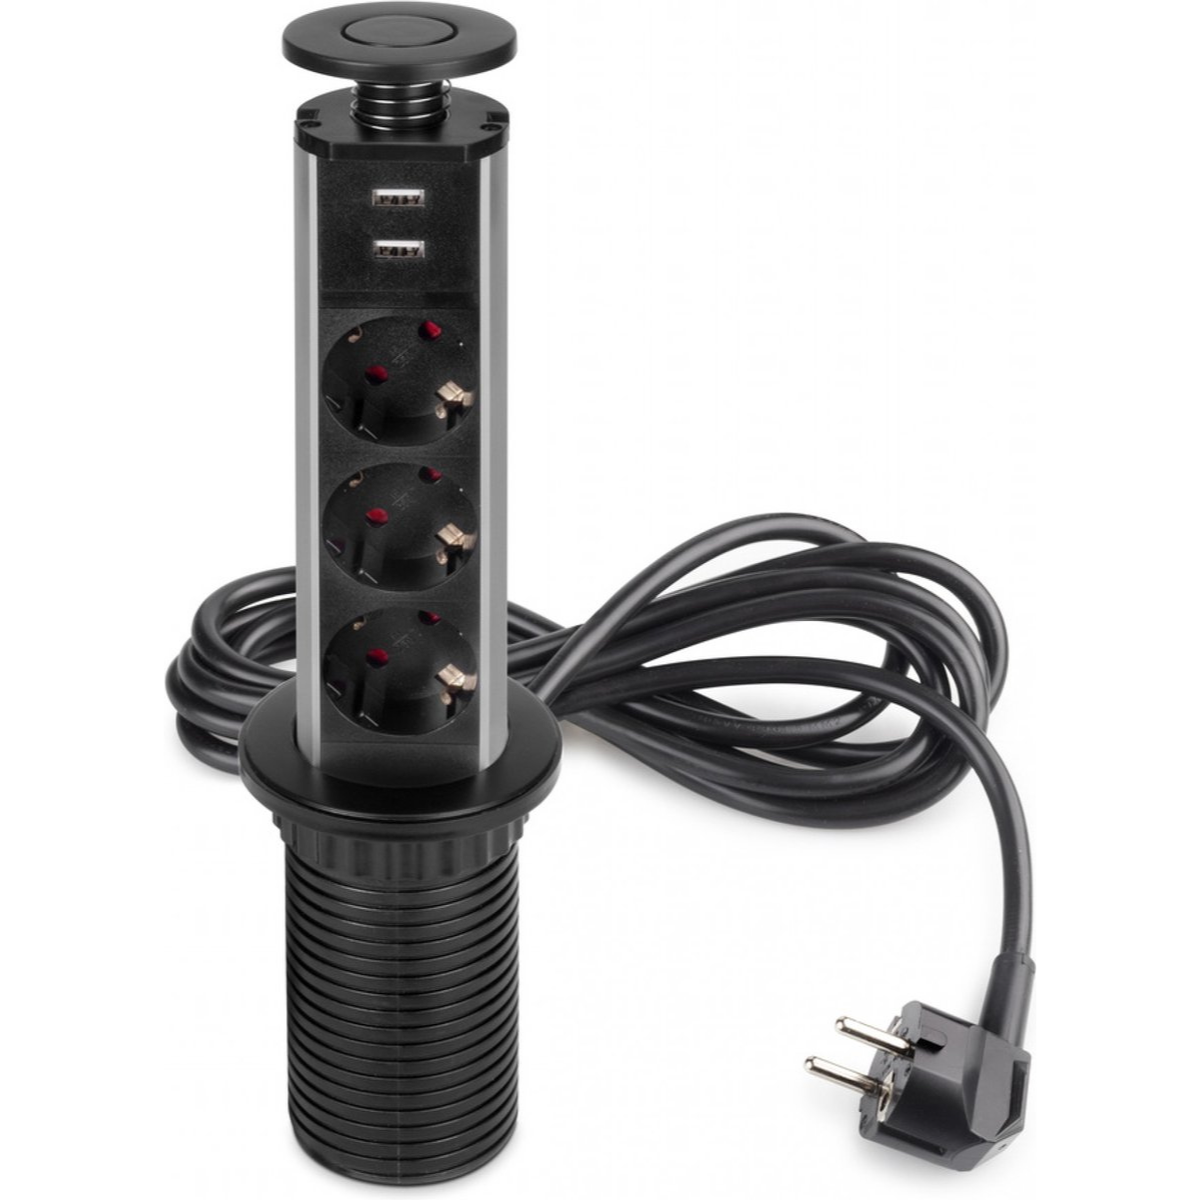 Nancy's Pop-up built-in power strip with 3 sockets and 2 USB charging points